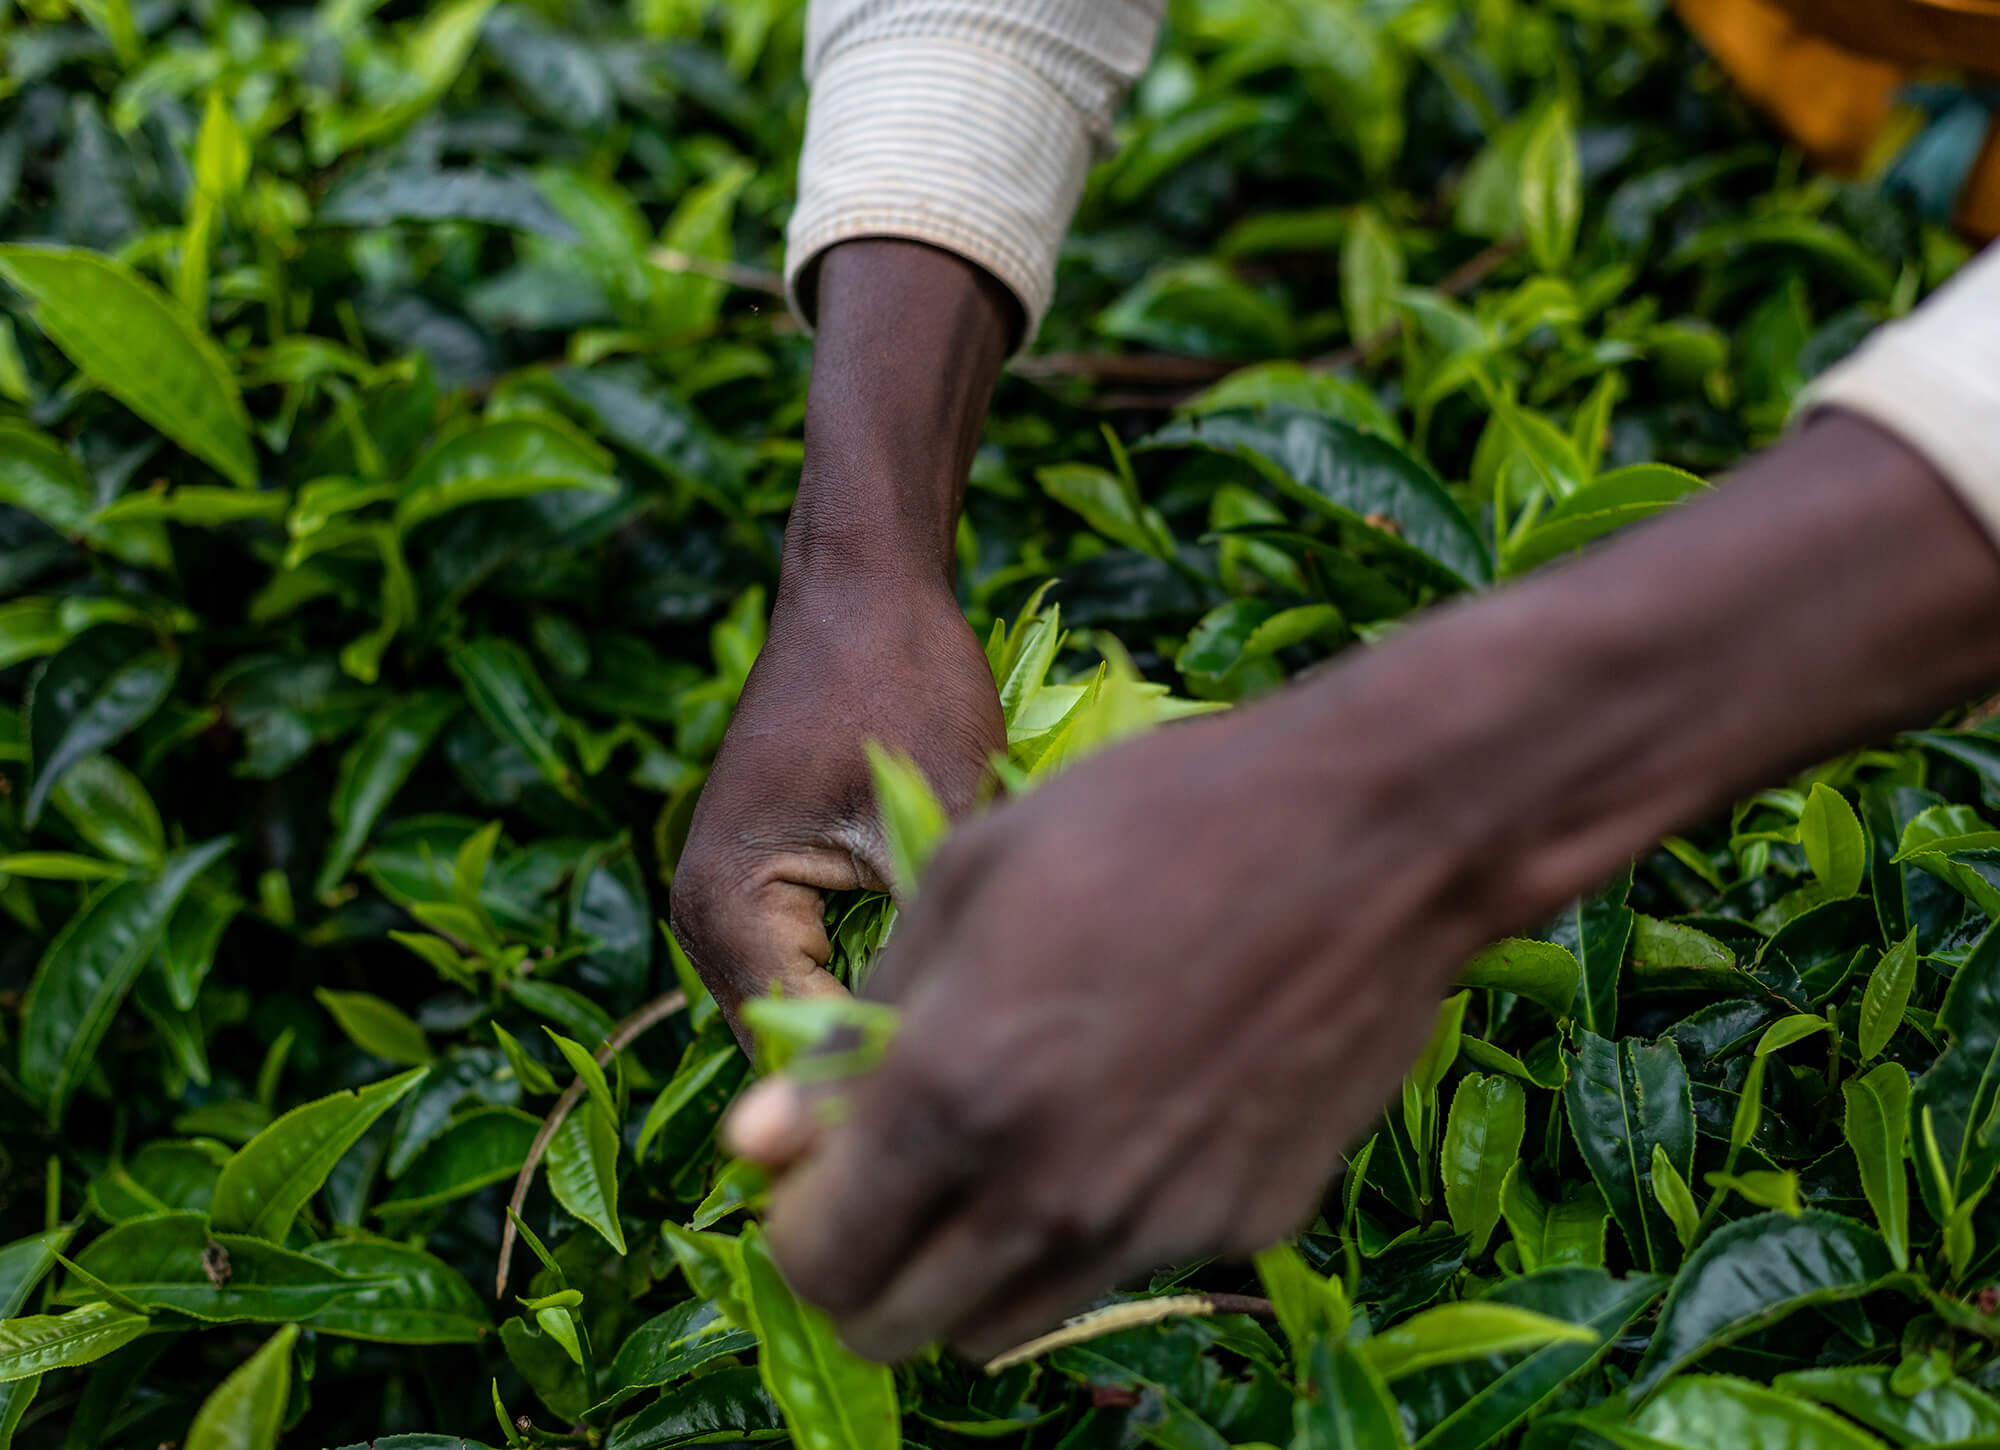 Hands picking tea leaves from plants in a field